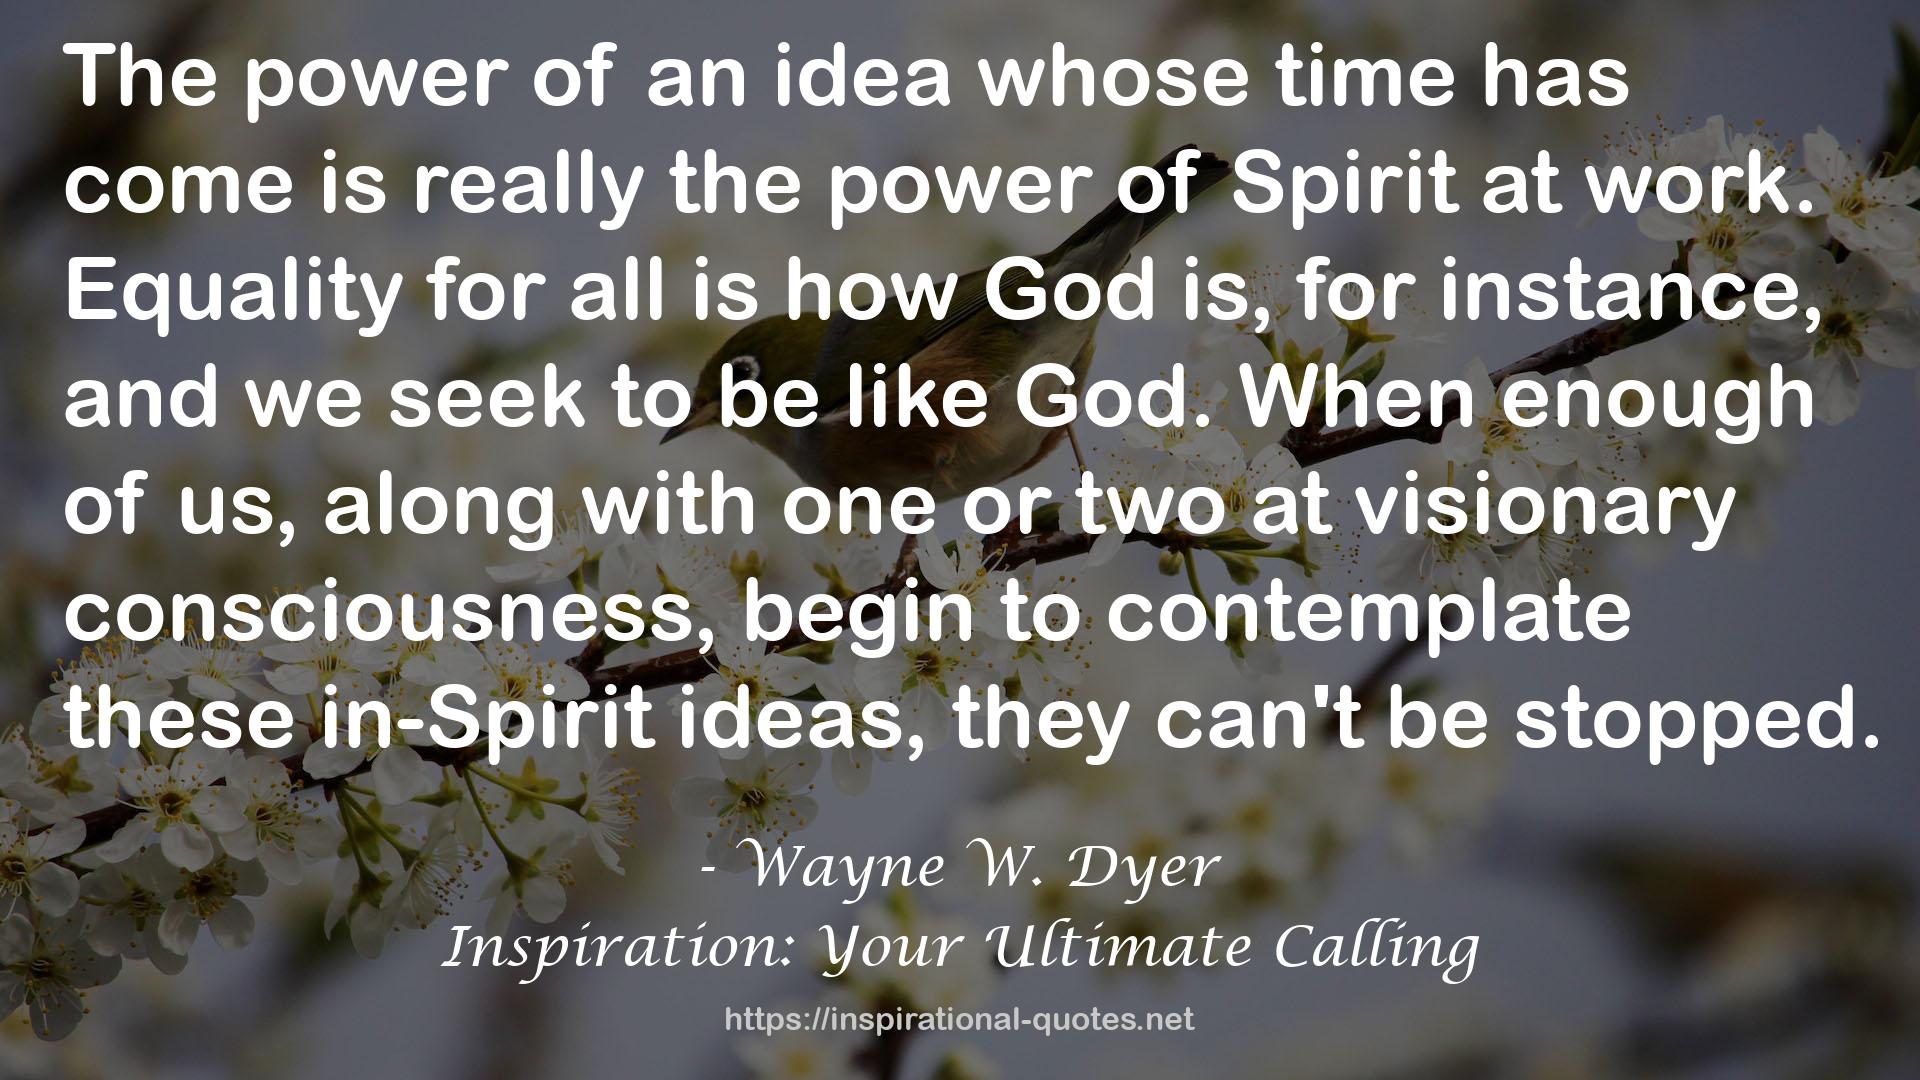 Inspiration: Your Ultimate Calling QUOTES